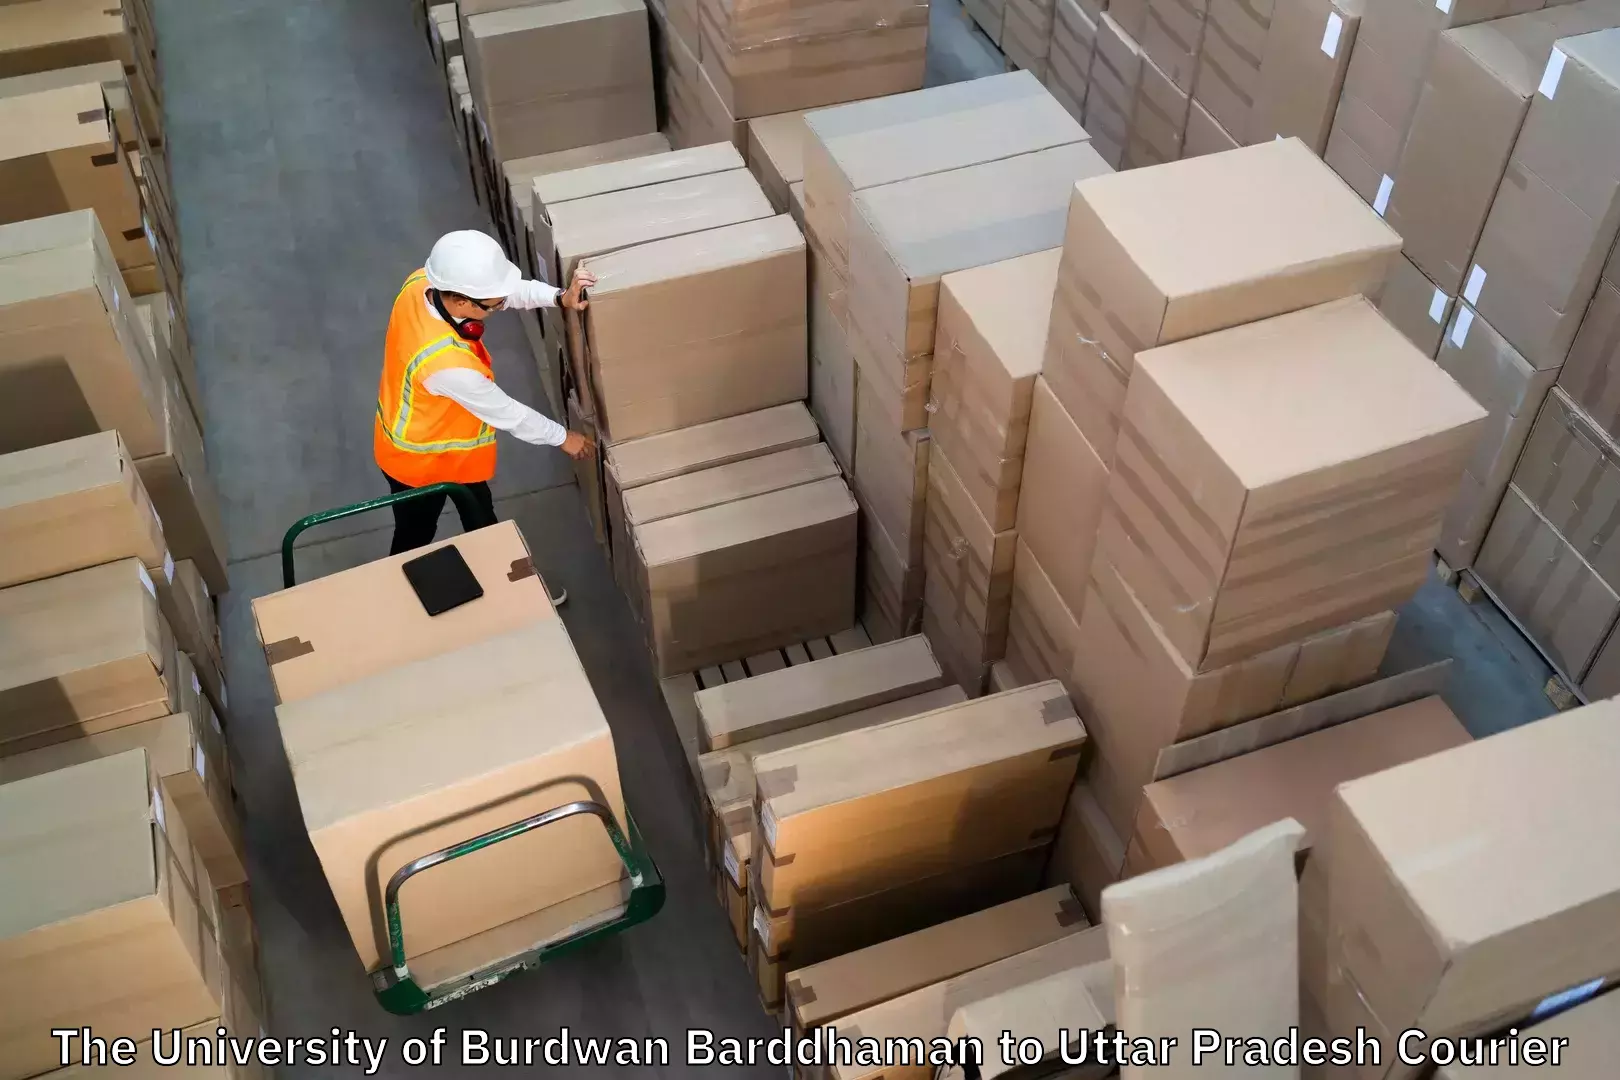 Customized luggage delivery The University of Burdwan Barddhaman to Konch